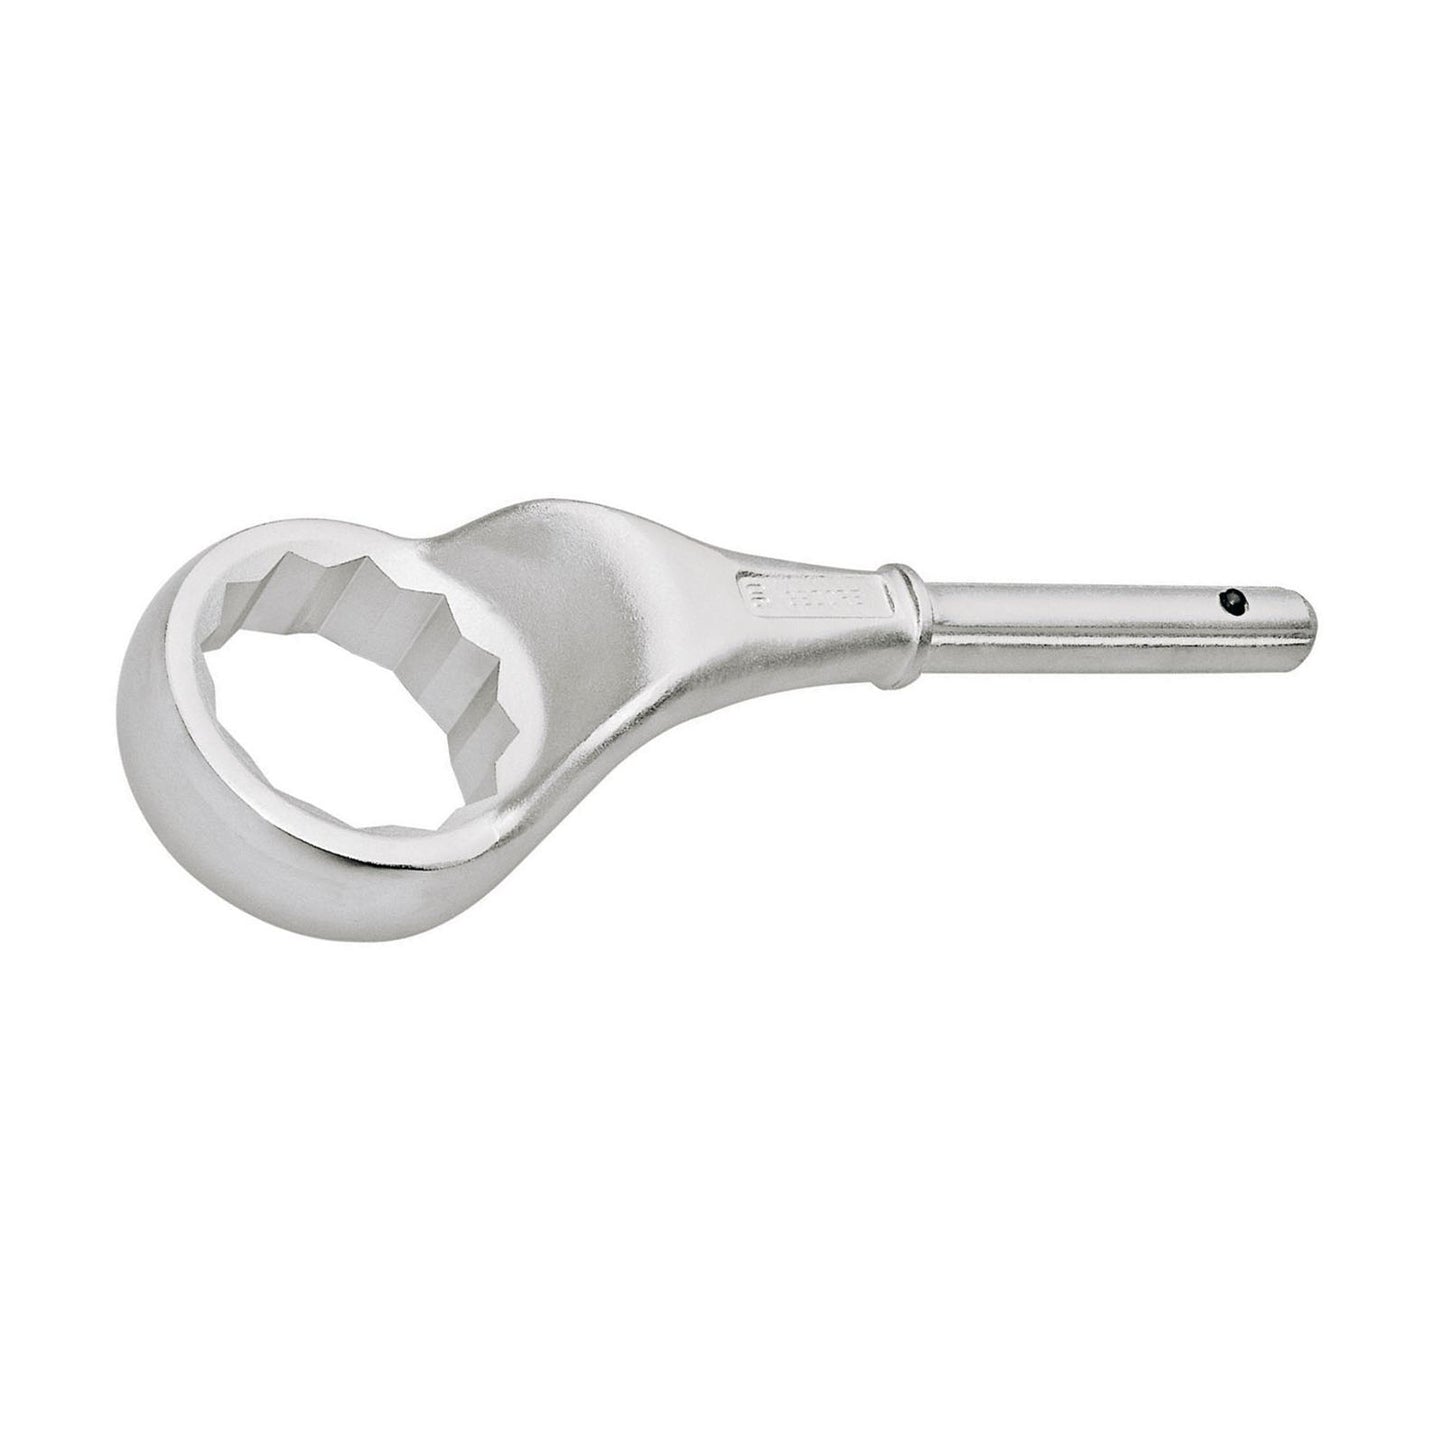 GEDORE 2 A 80 - Traction Wrench, 80mm (6035380)